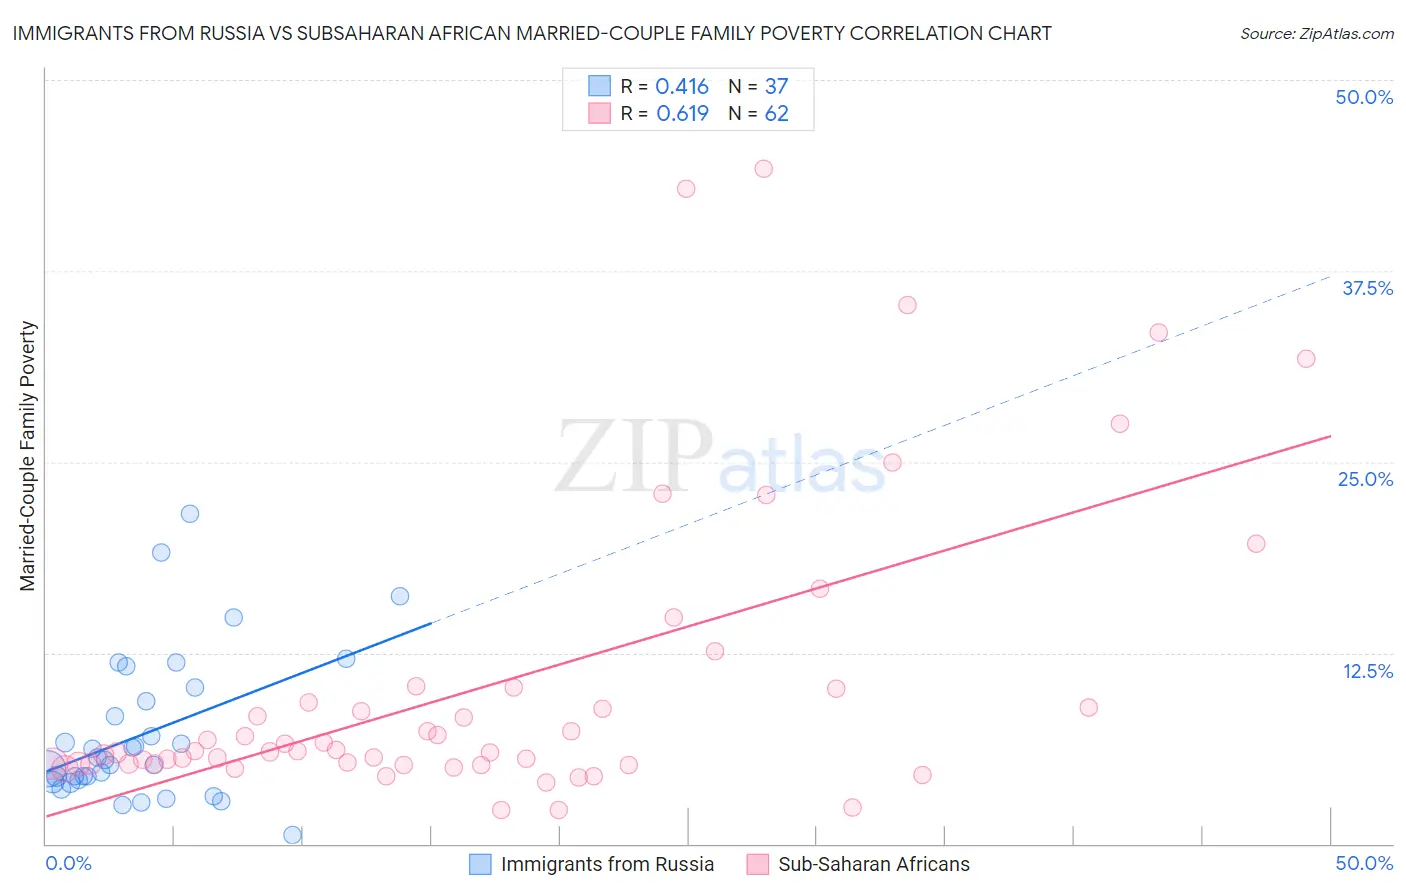 Immigrants from Russia vs Subsaharan African Married-Couple Family Poverty